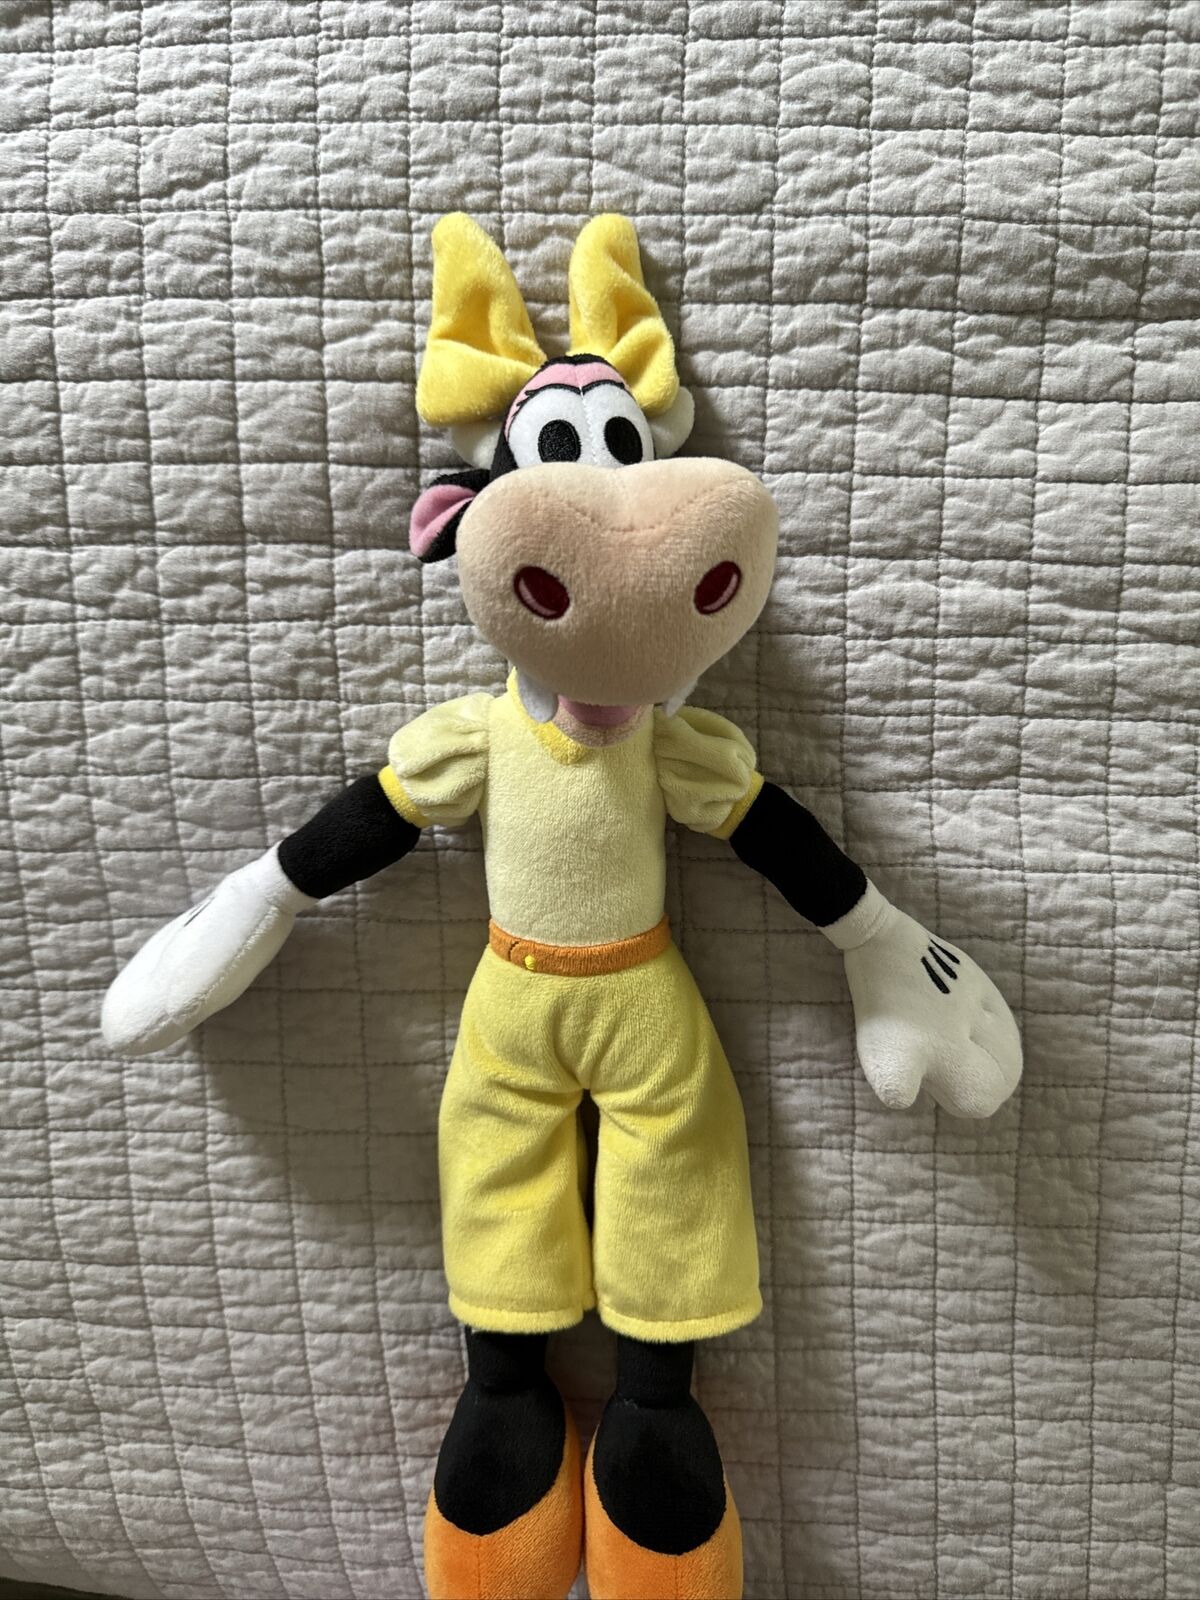 RARE Disney Store Authentic Clarabelle Cow 15 inch Plush Excellen Used Condition